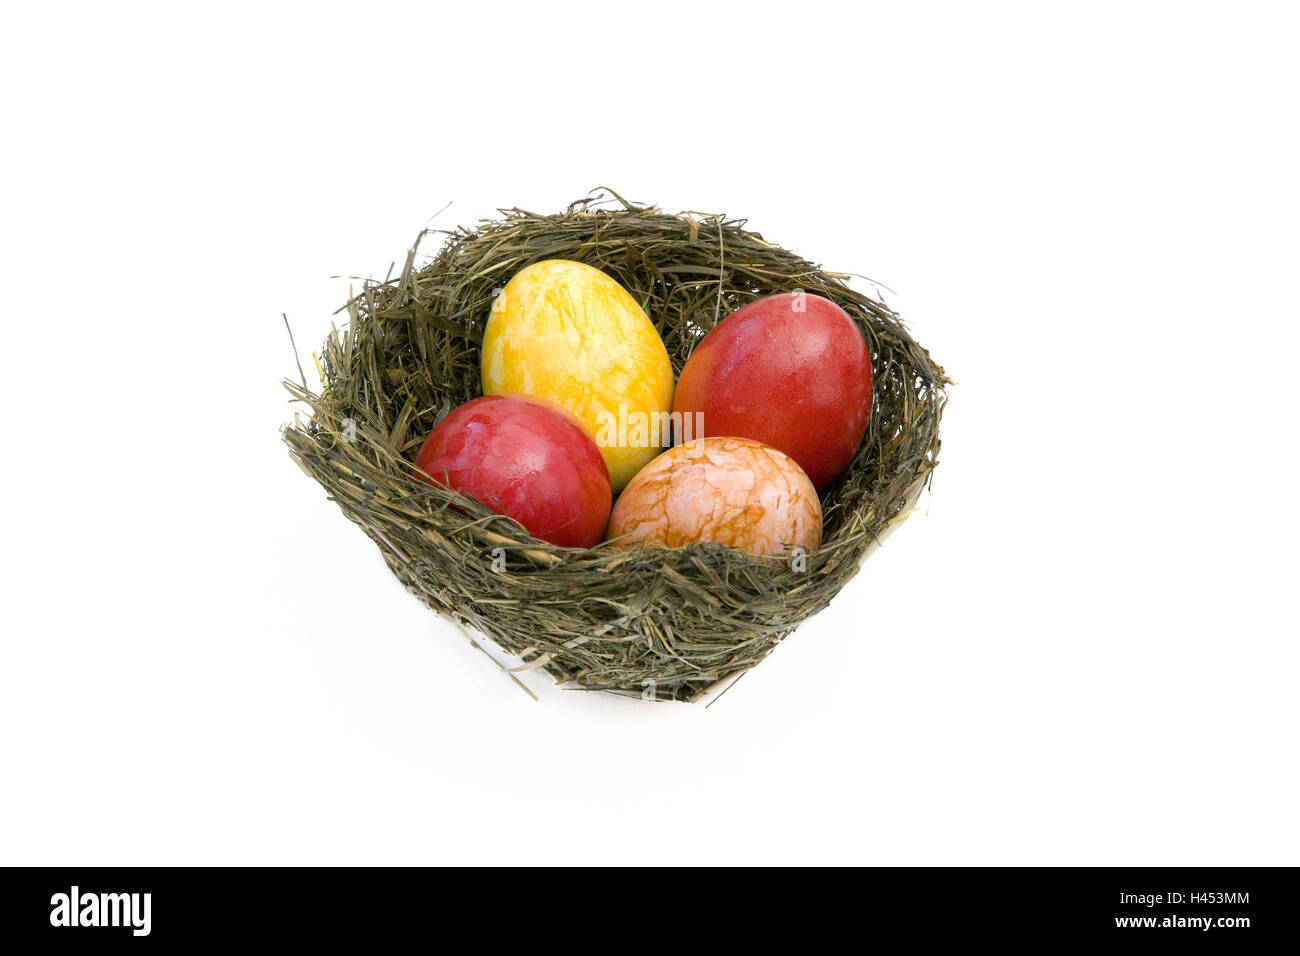 Easter nest, eggs, brightly, four, cut out, Easter, Easter feast, custom, Easter custom, traditions, nest, Easter eggs, colorfully, yellow, red, orange, hay, hay nest, conception, childhood, product photography, studio, Stock Photo